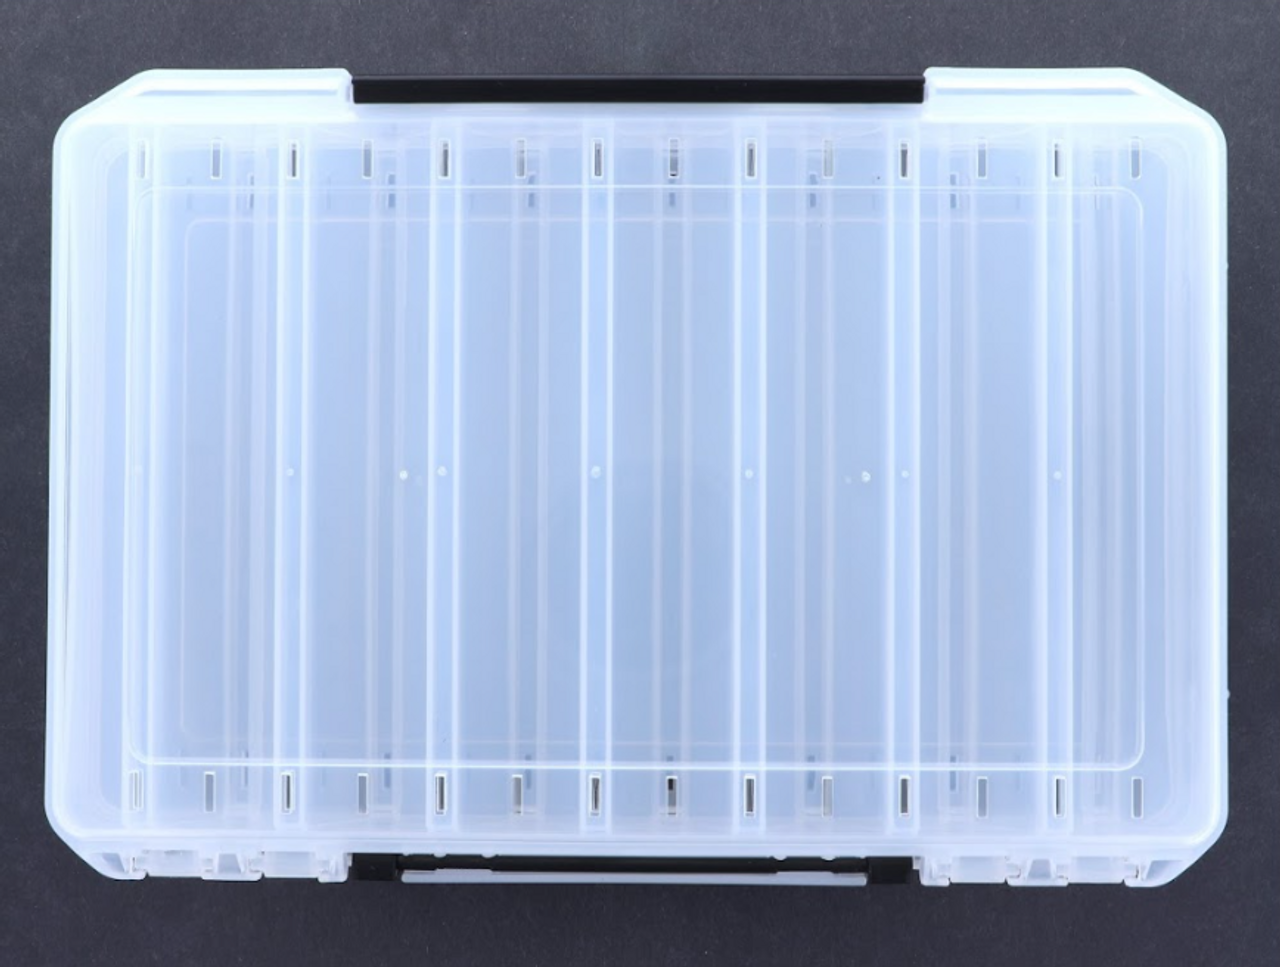 Amish Outfitters Double Sided Crankbait Box 14 Compartment, 45% OFF